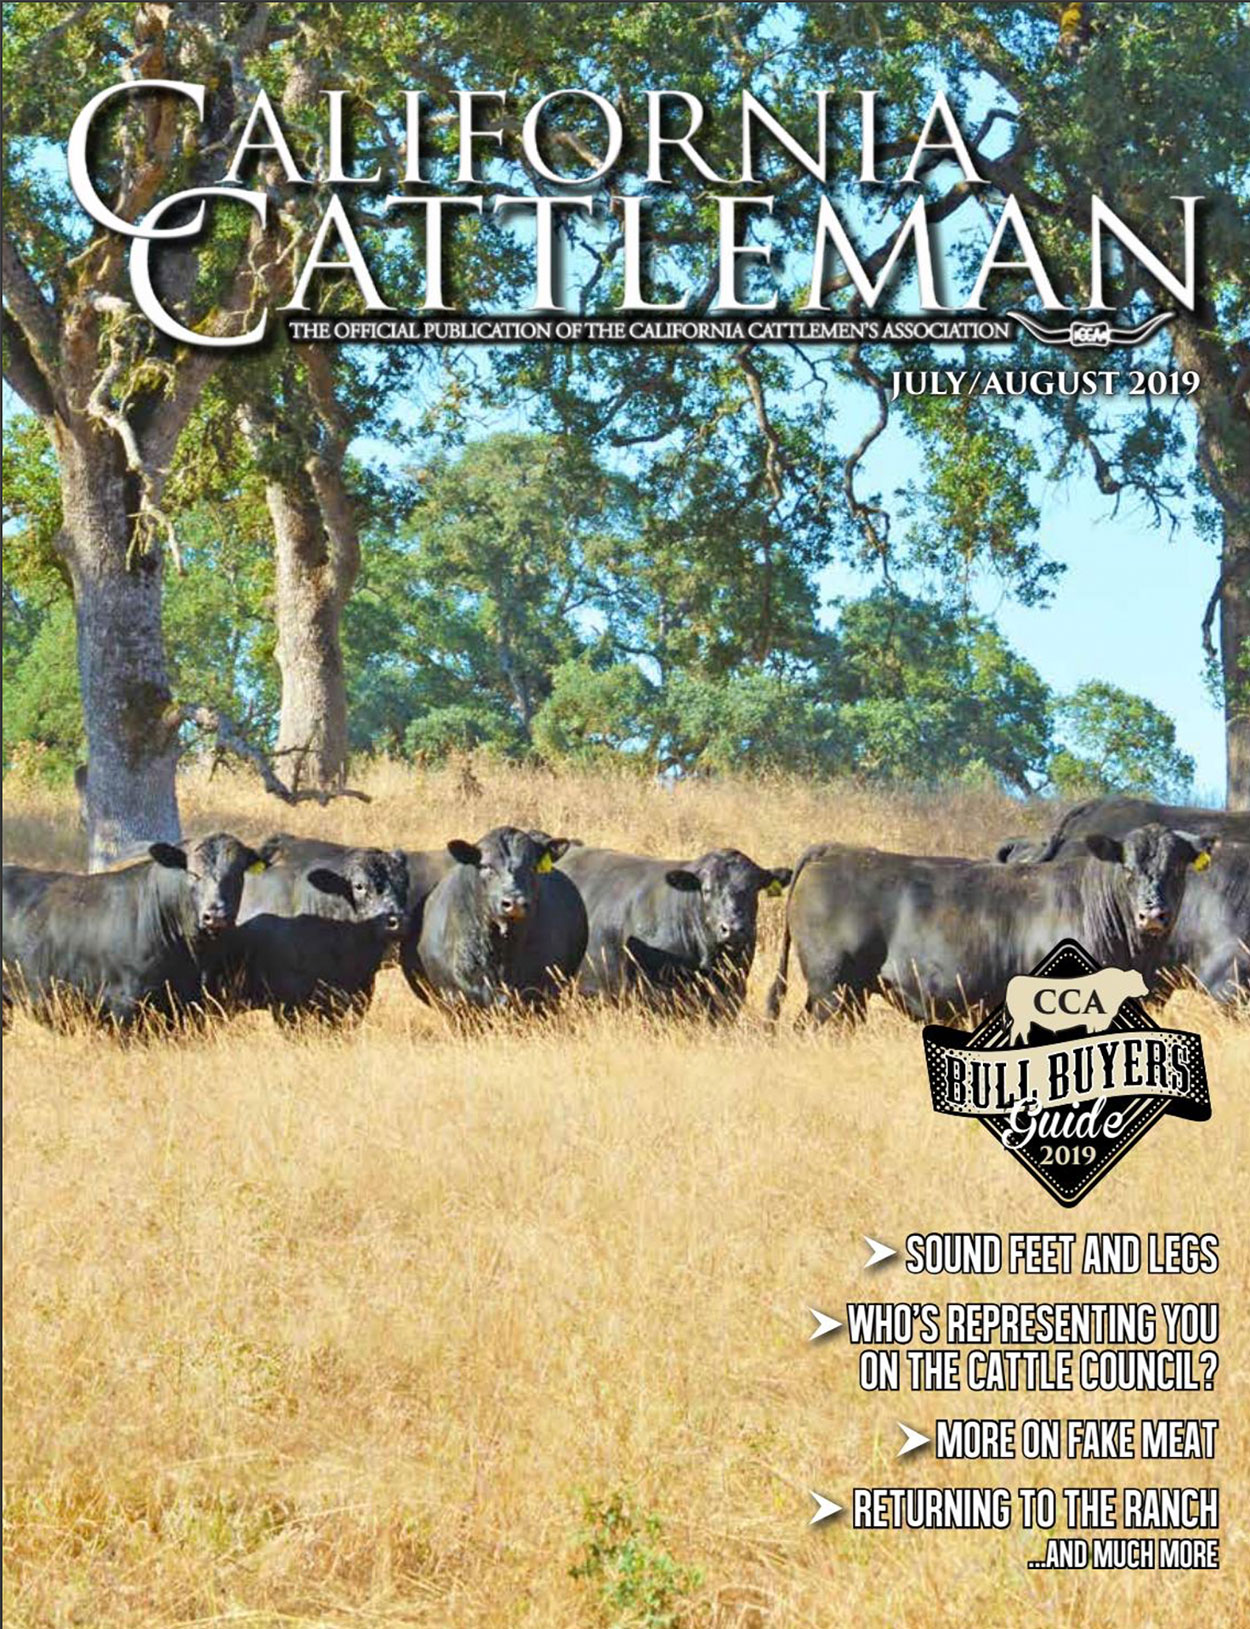 Bulls on the cover of the July/August 2019 issue of the California Cattleman